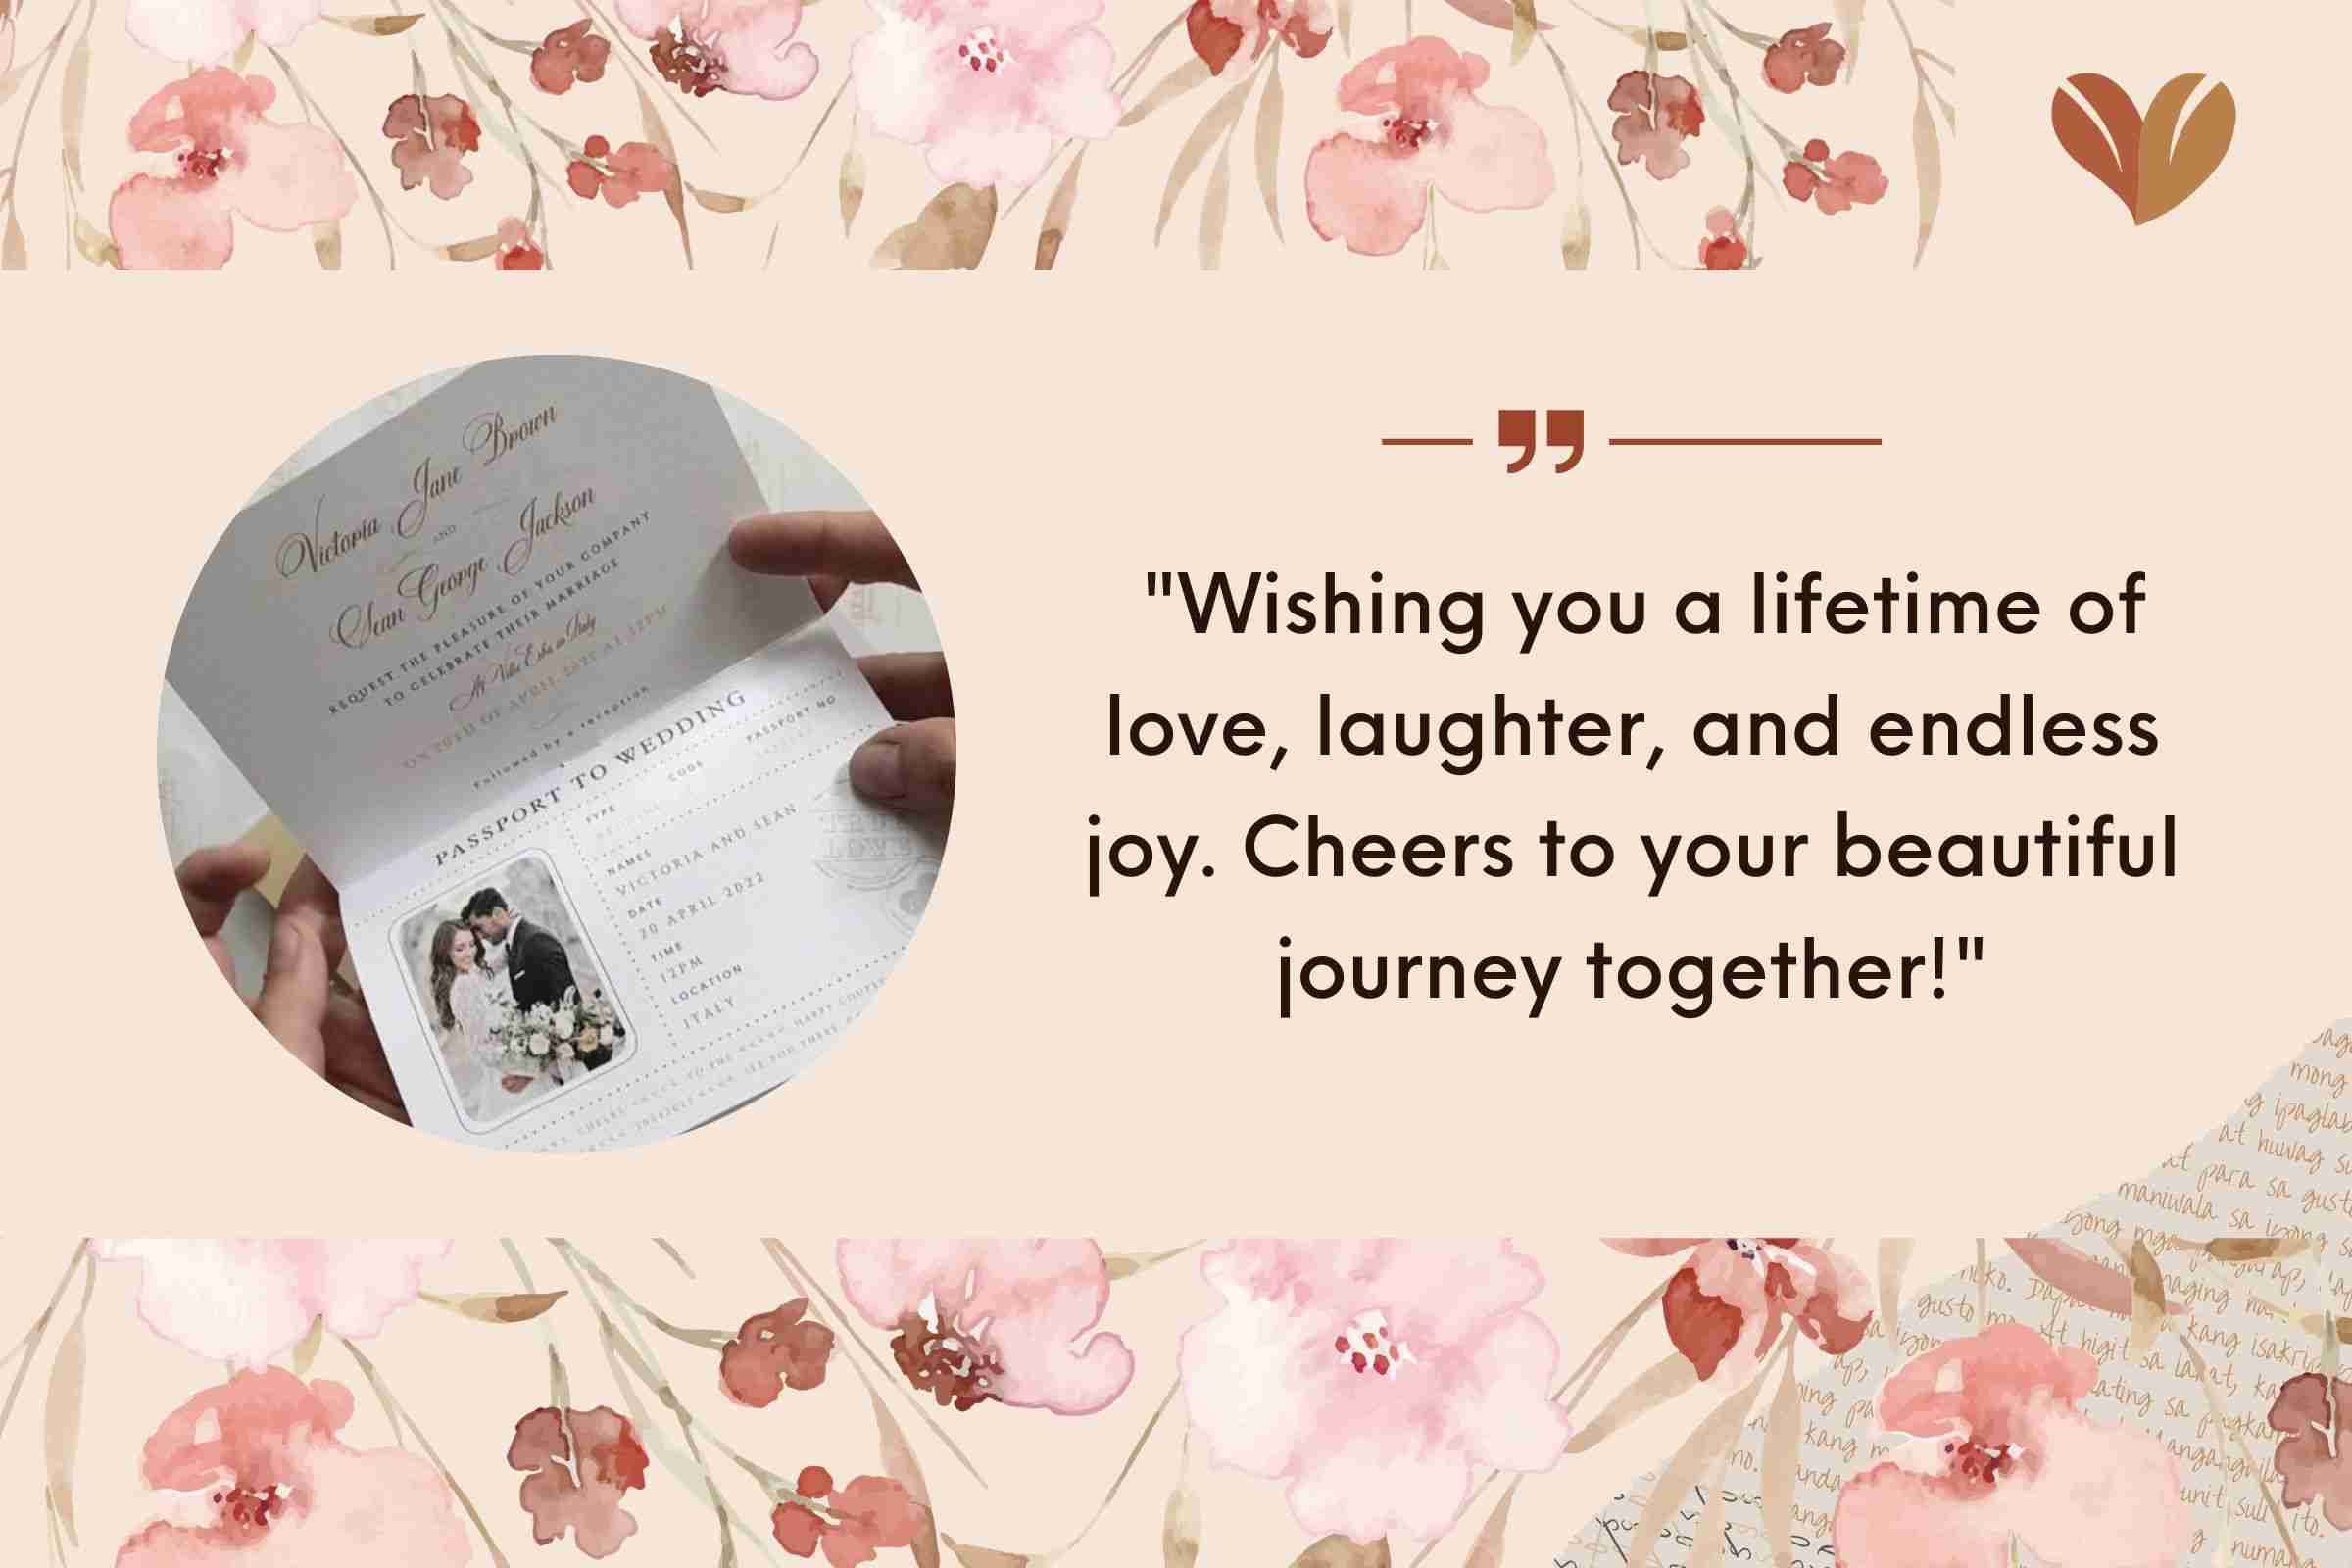  "Wishing you a lifetime of love, laughter, and endless joy. Cheers to your beautiful journey together!"